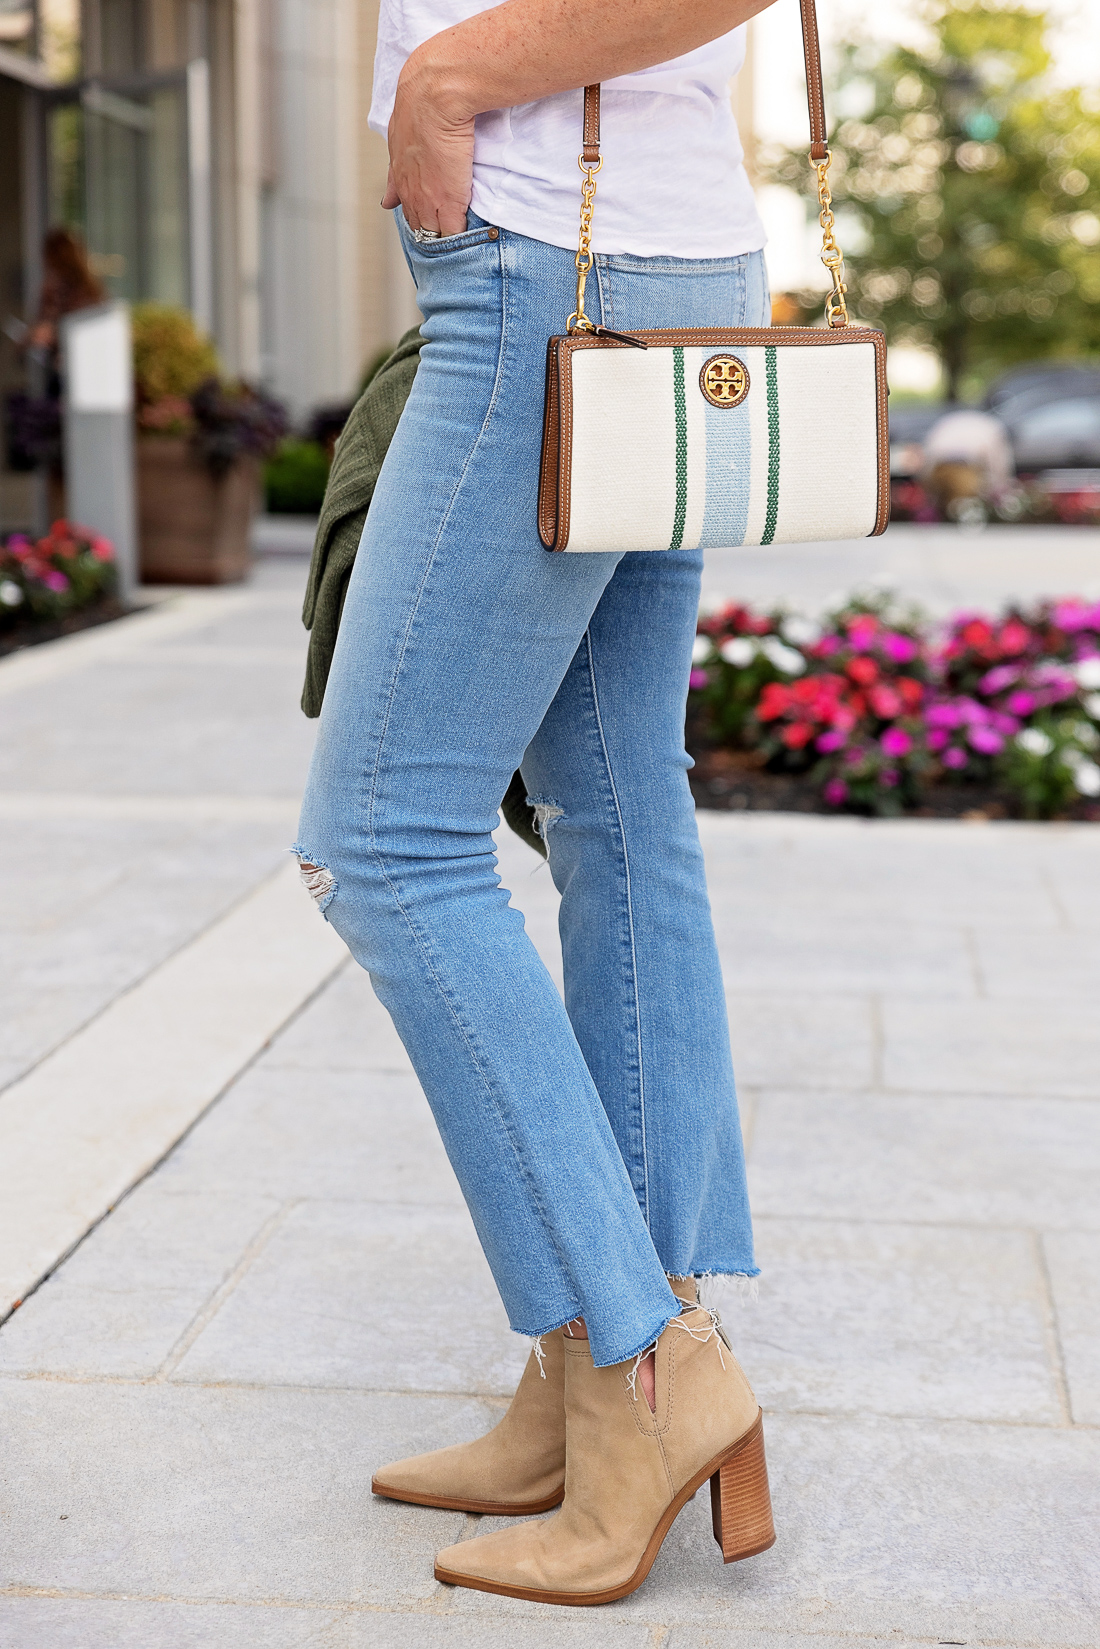 Mother Insider Crop Flare Jeans with Vince Camuto Welland Booties and Tory Burch Carson Striped Crossbody Bag from Nordstrom Anniversary Sale 2021